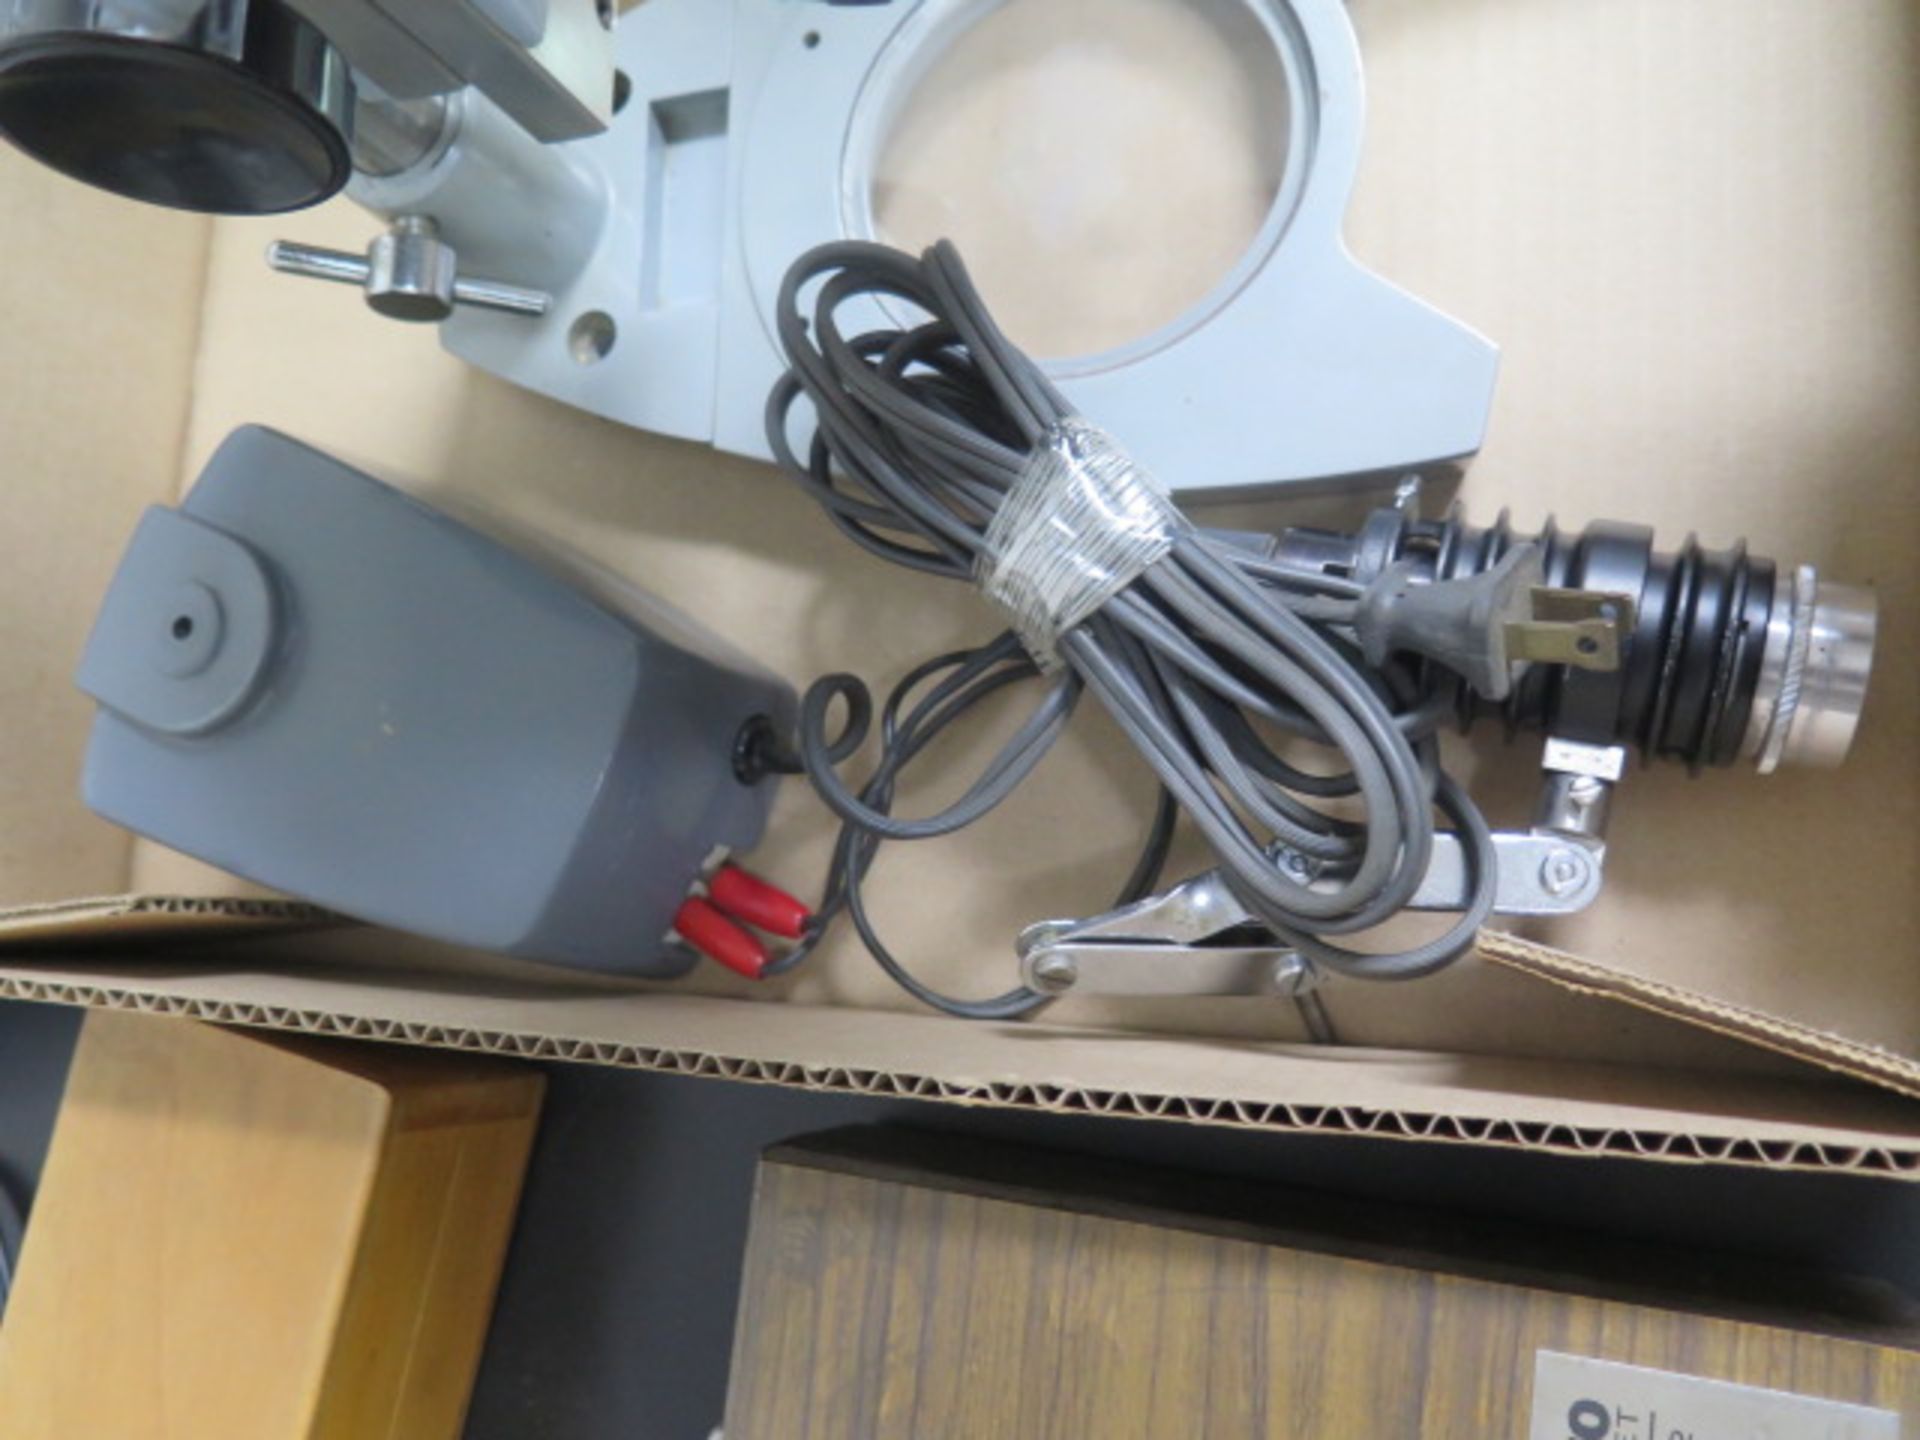 AO Stereo Microscope w/ Light Source (SOLD AS-IS - NO WARRANTY) - Image 5 of 6